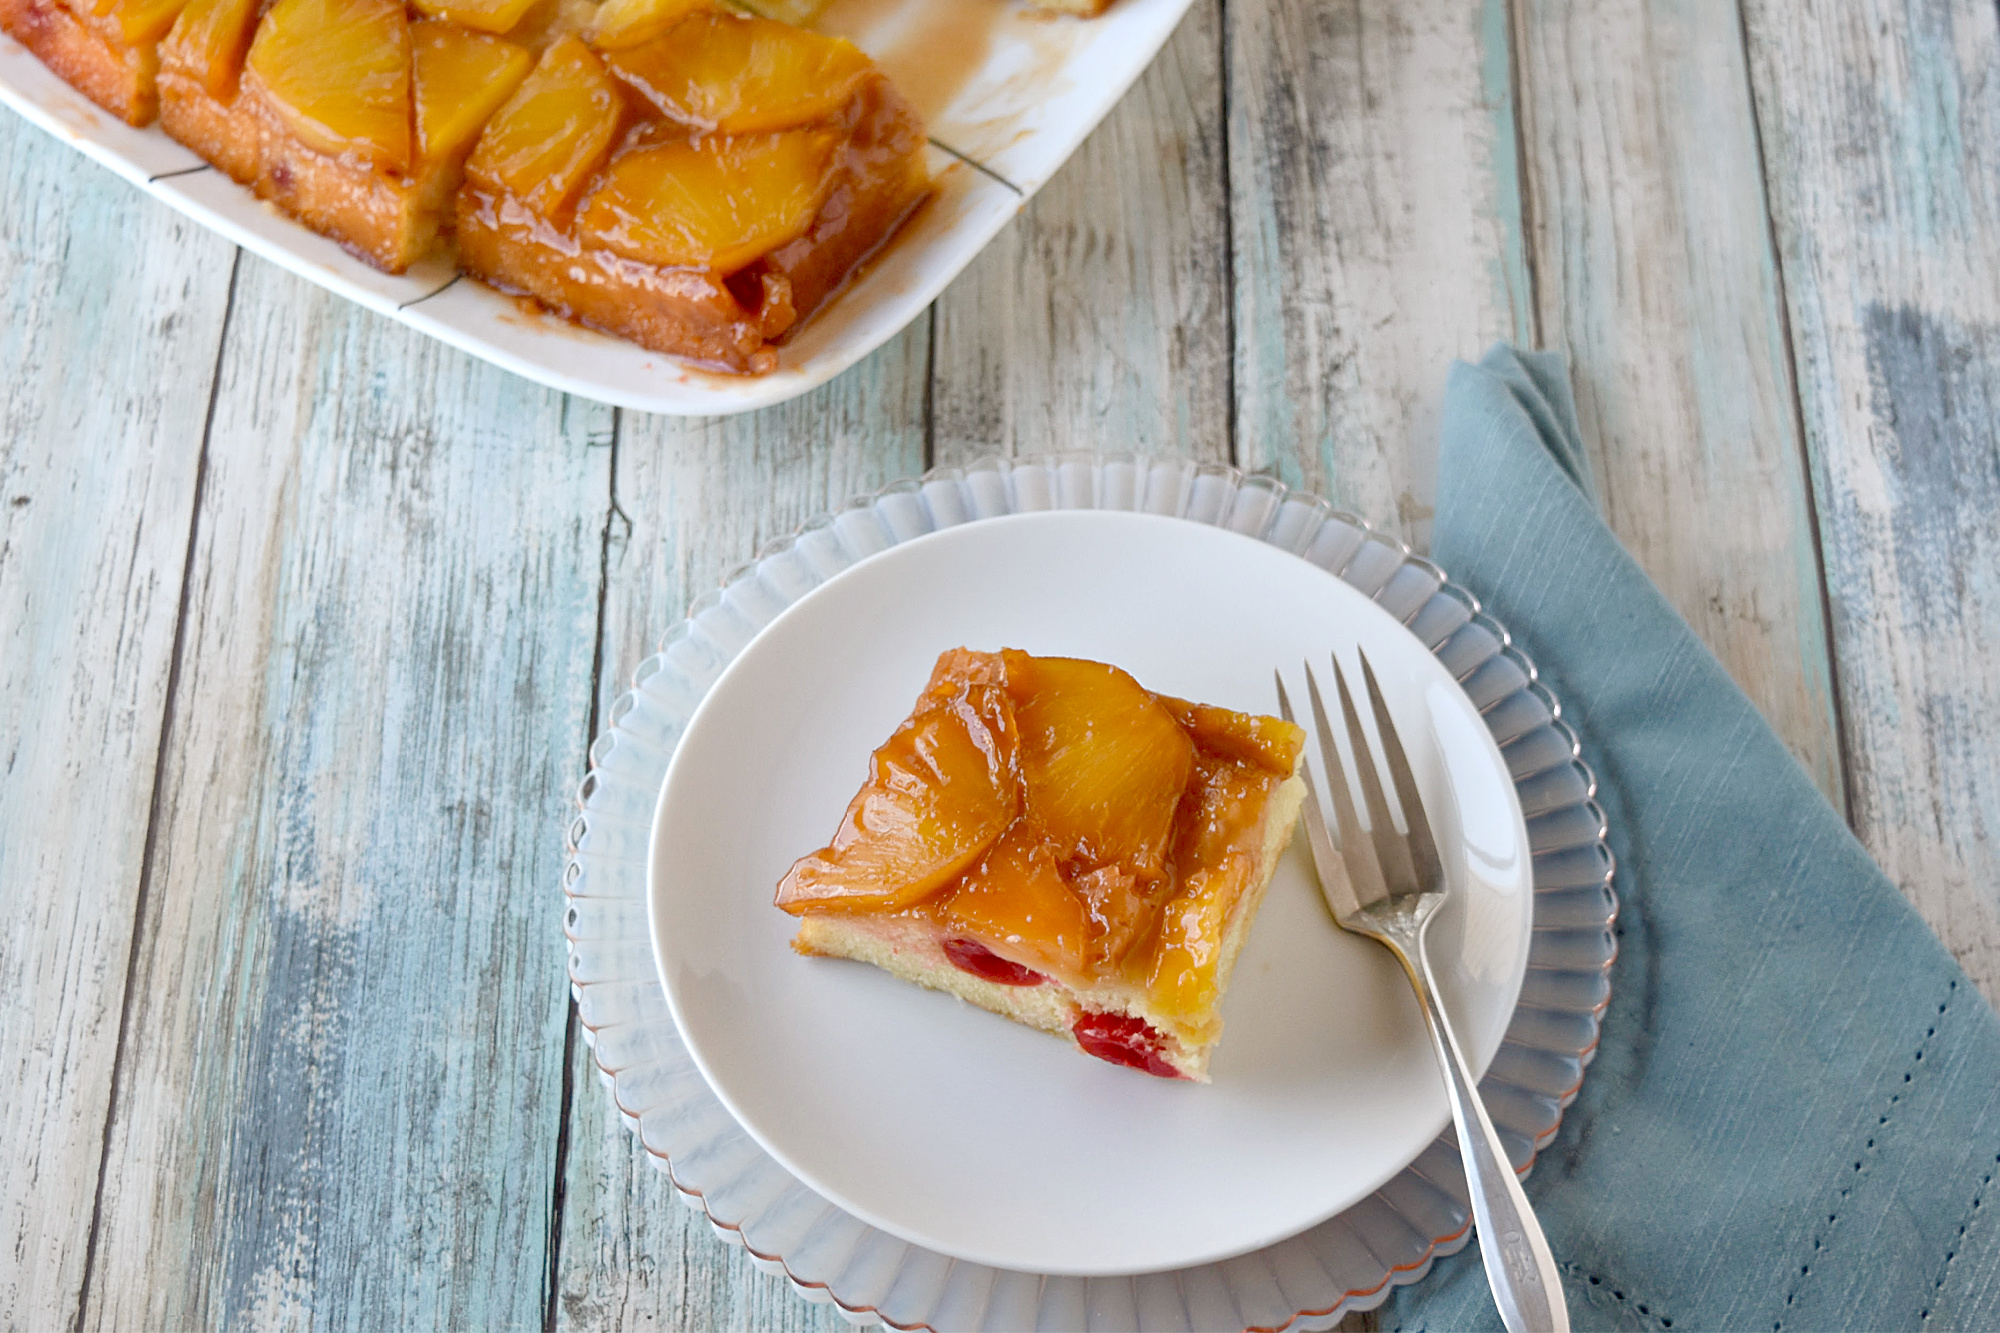 Fresh Pineapple Upside Down Cake has fresh, sweet t on top hand light and moist cake underneath.  It's a simple and quick cake that bakes up easily. #SpringSweetsWeek